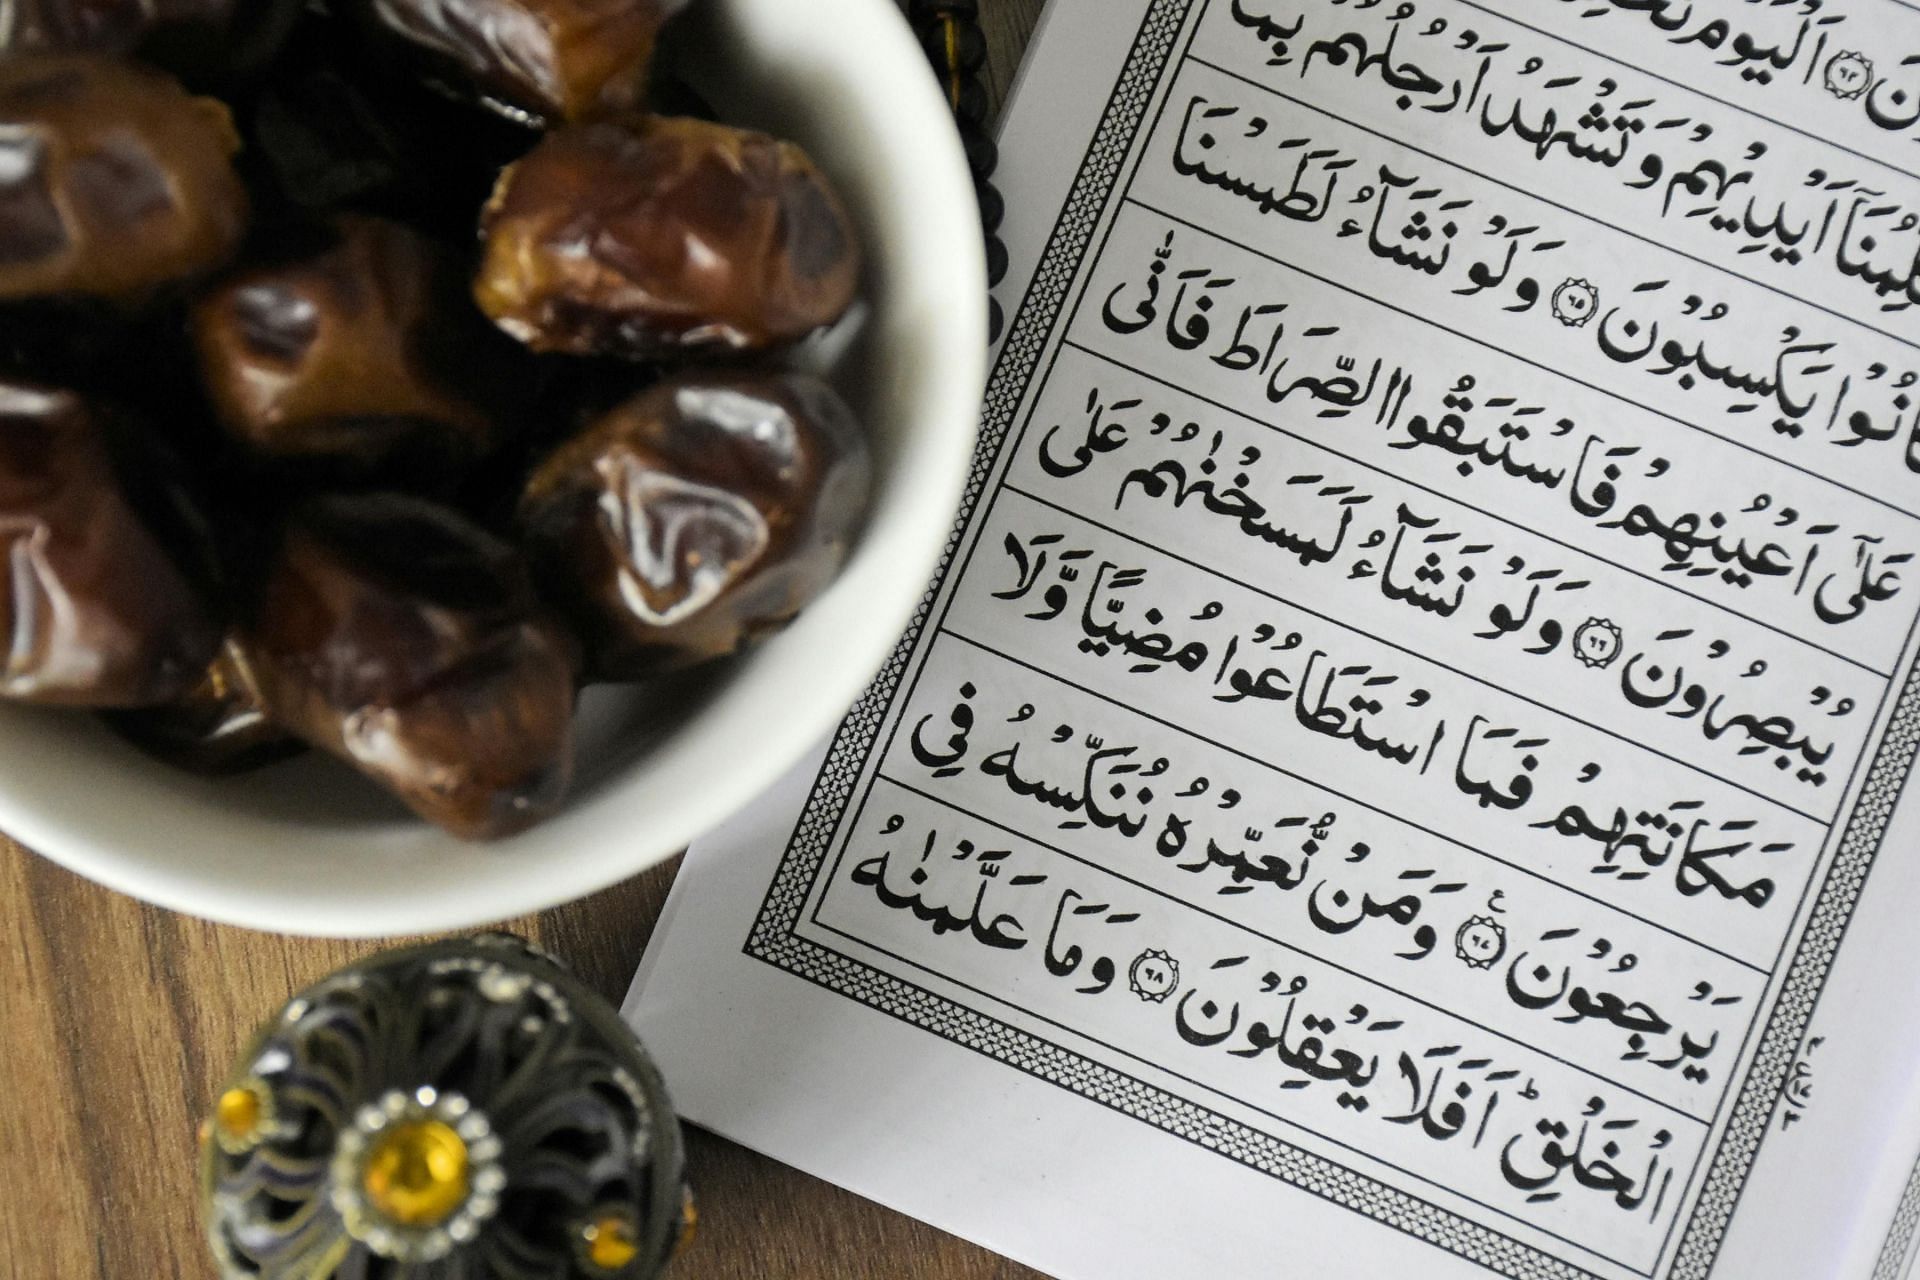 Benefits of fasting in Ramadan (image sourced via Pexels / Photo by khats)